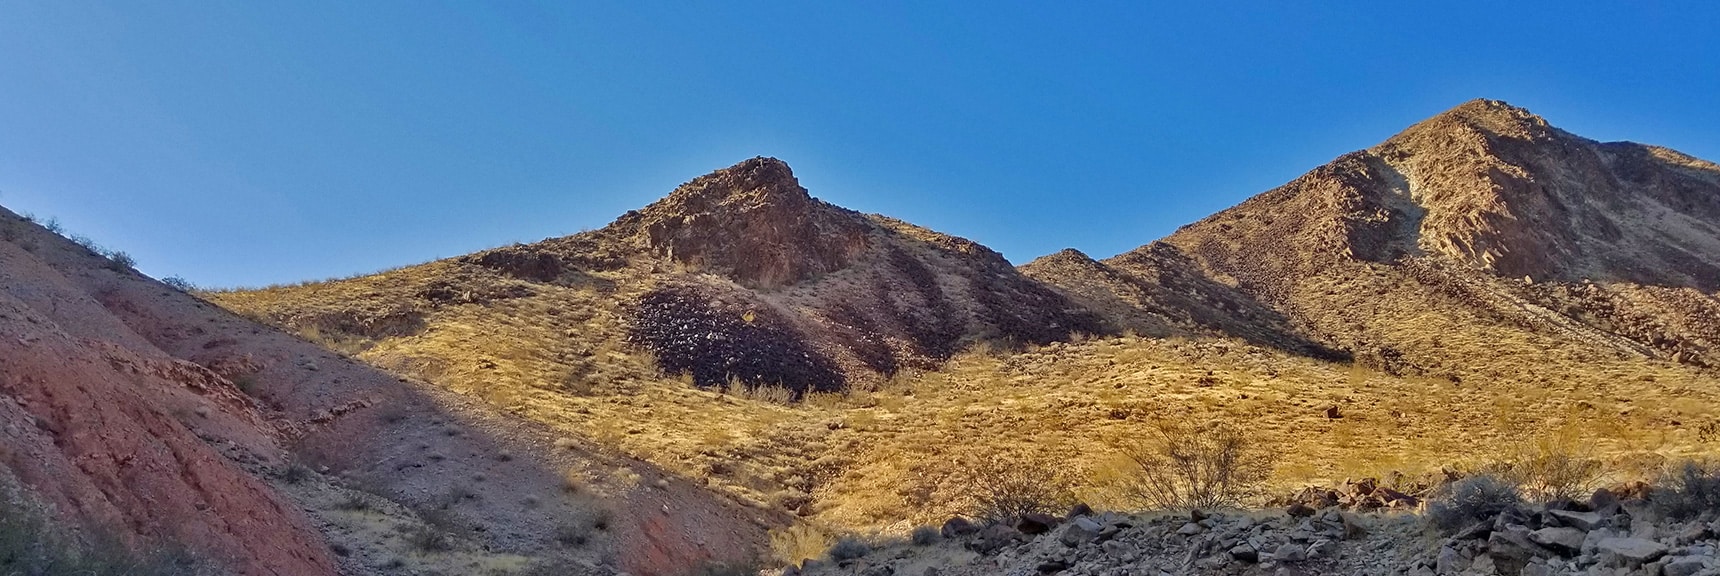 View Back to Lava Butte and the Saddle Pass to the Northern Summit Approach Route. | Lava Butte | Lake Mead National Recreation Area, Nevada